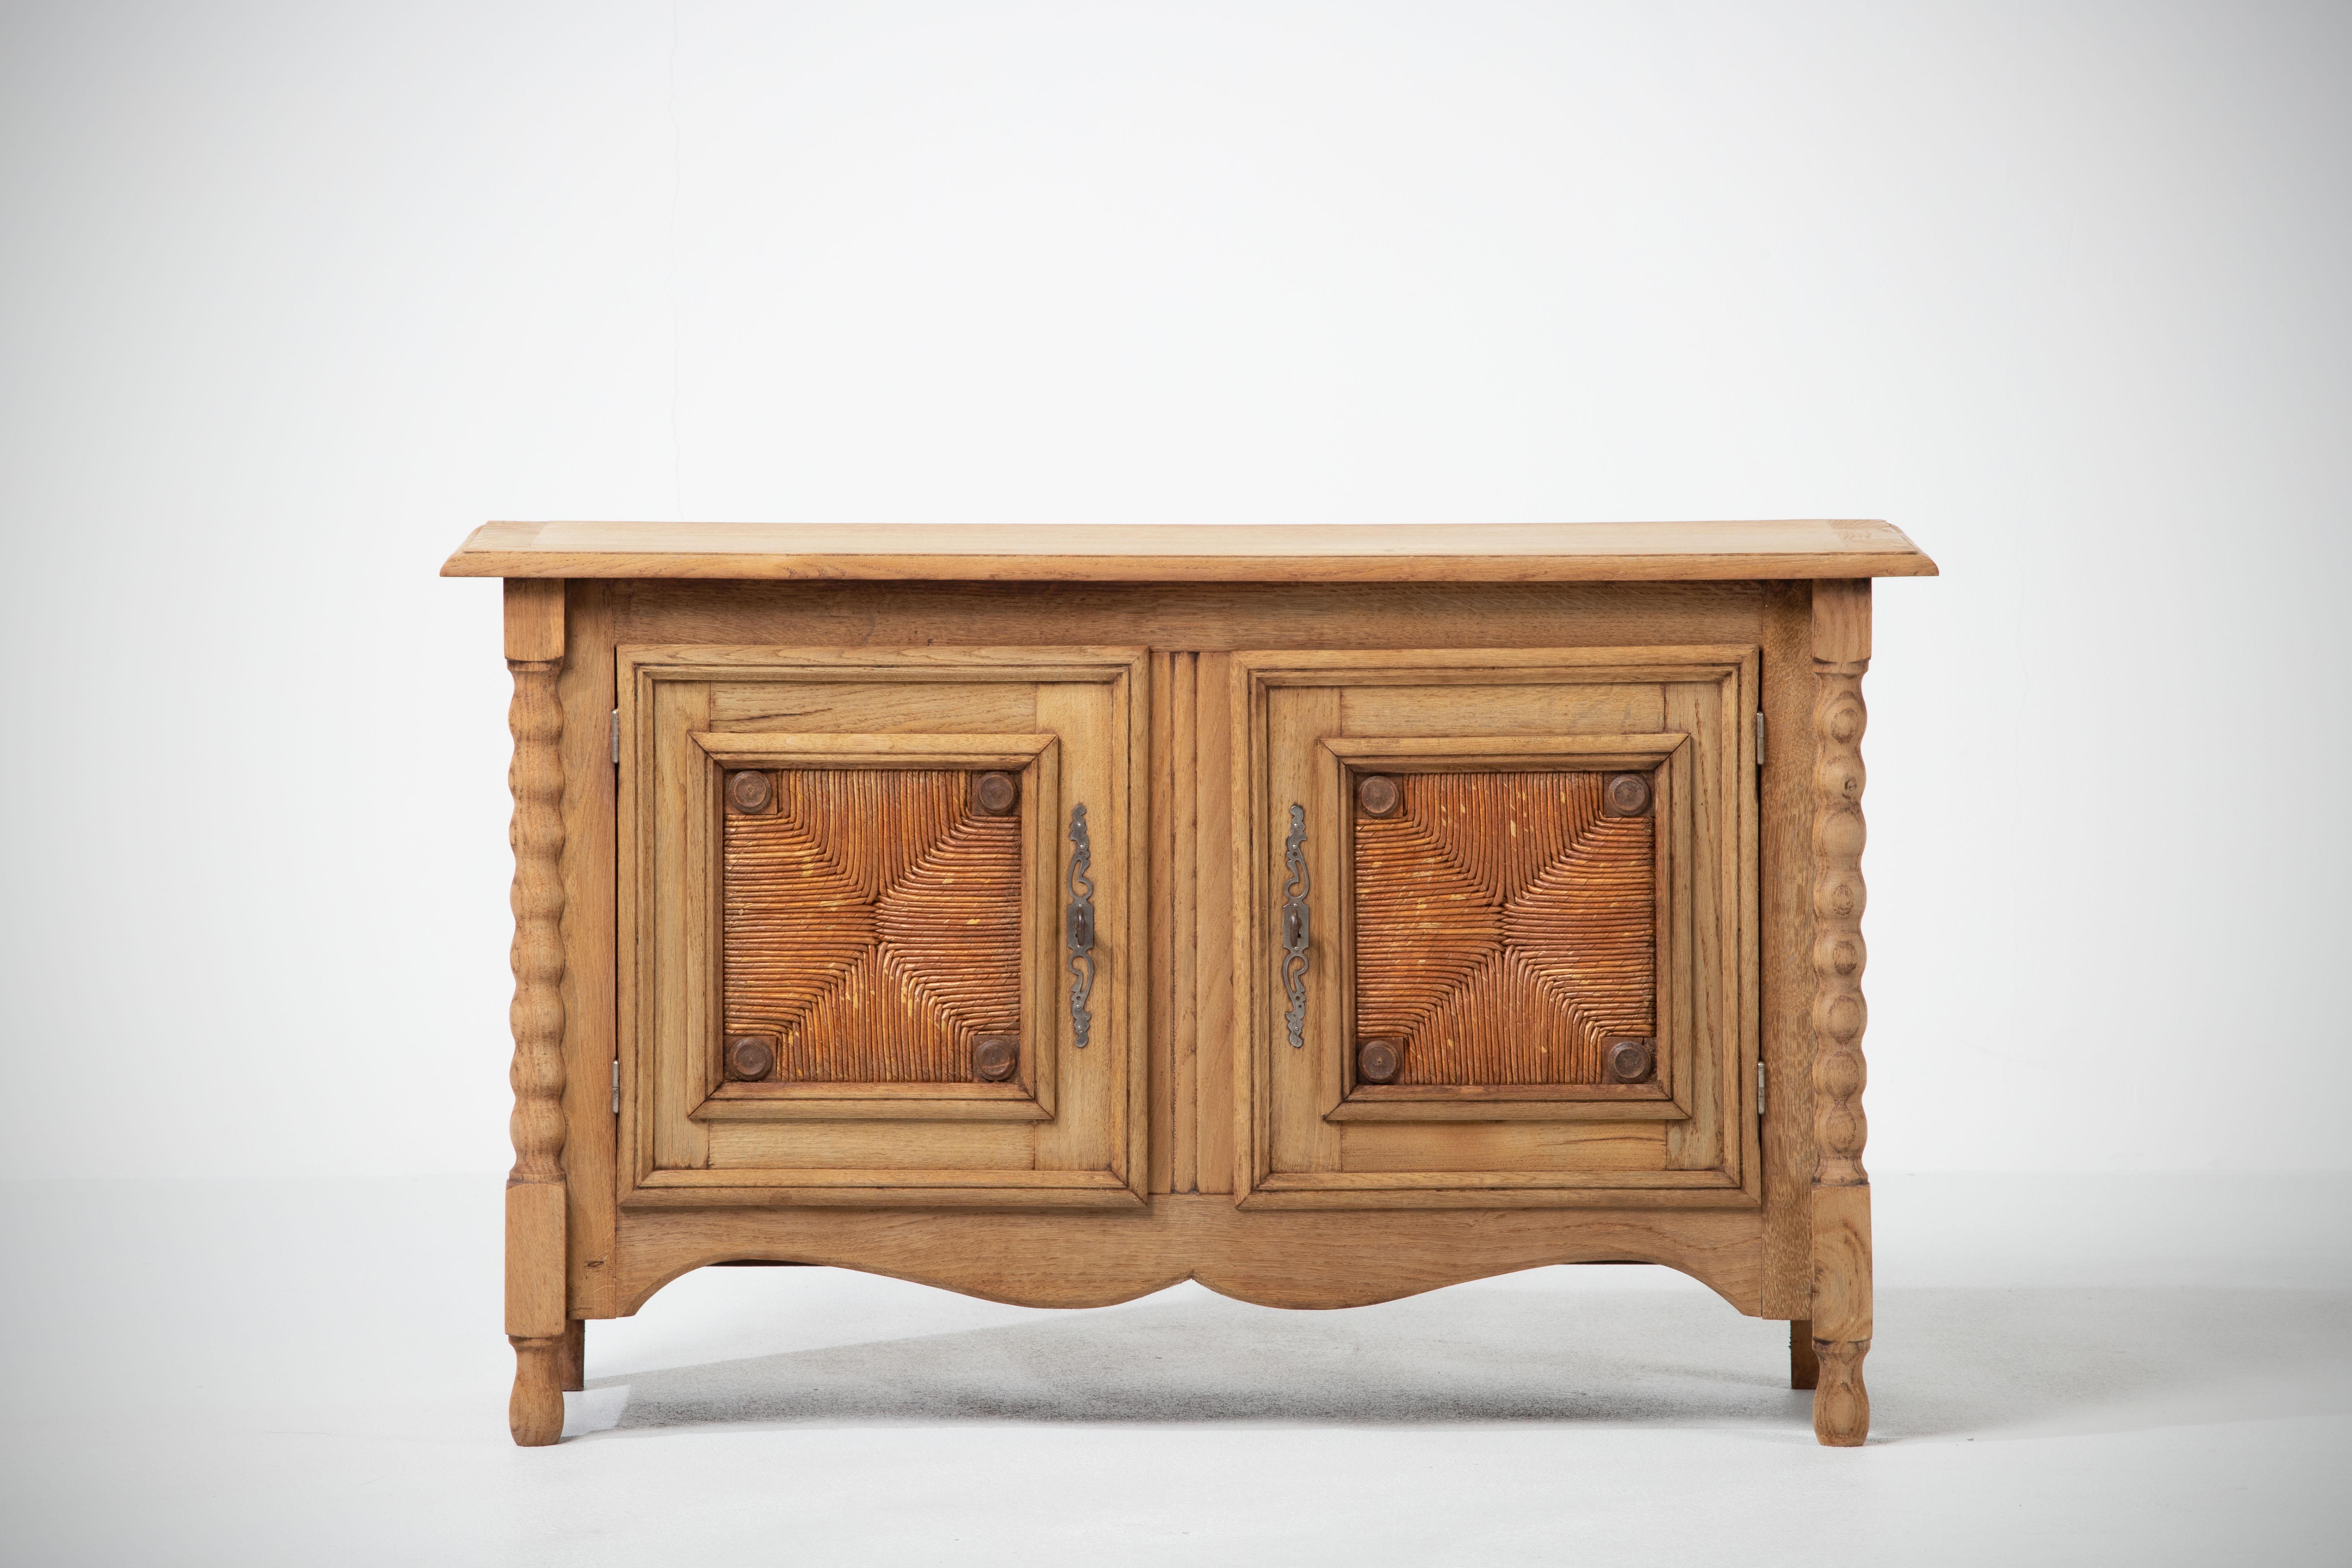 A two door provencal cabinet from France, circa 1940. 
Representing the casual yet refined aesthetic of the French countryside, patinated, enhancing the natural textured figure of the wood and subtle carved ornament. 
A testament to the durability